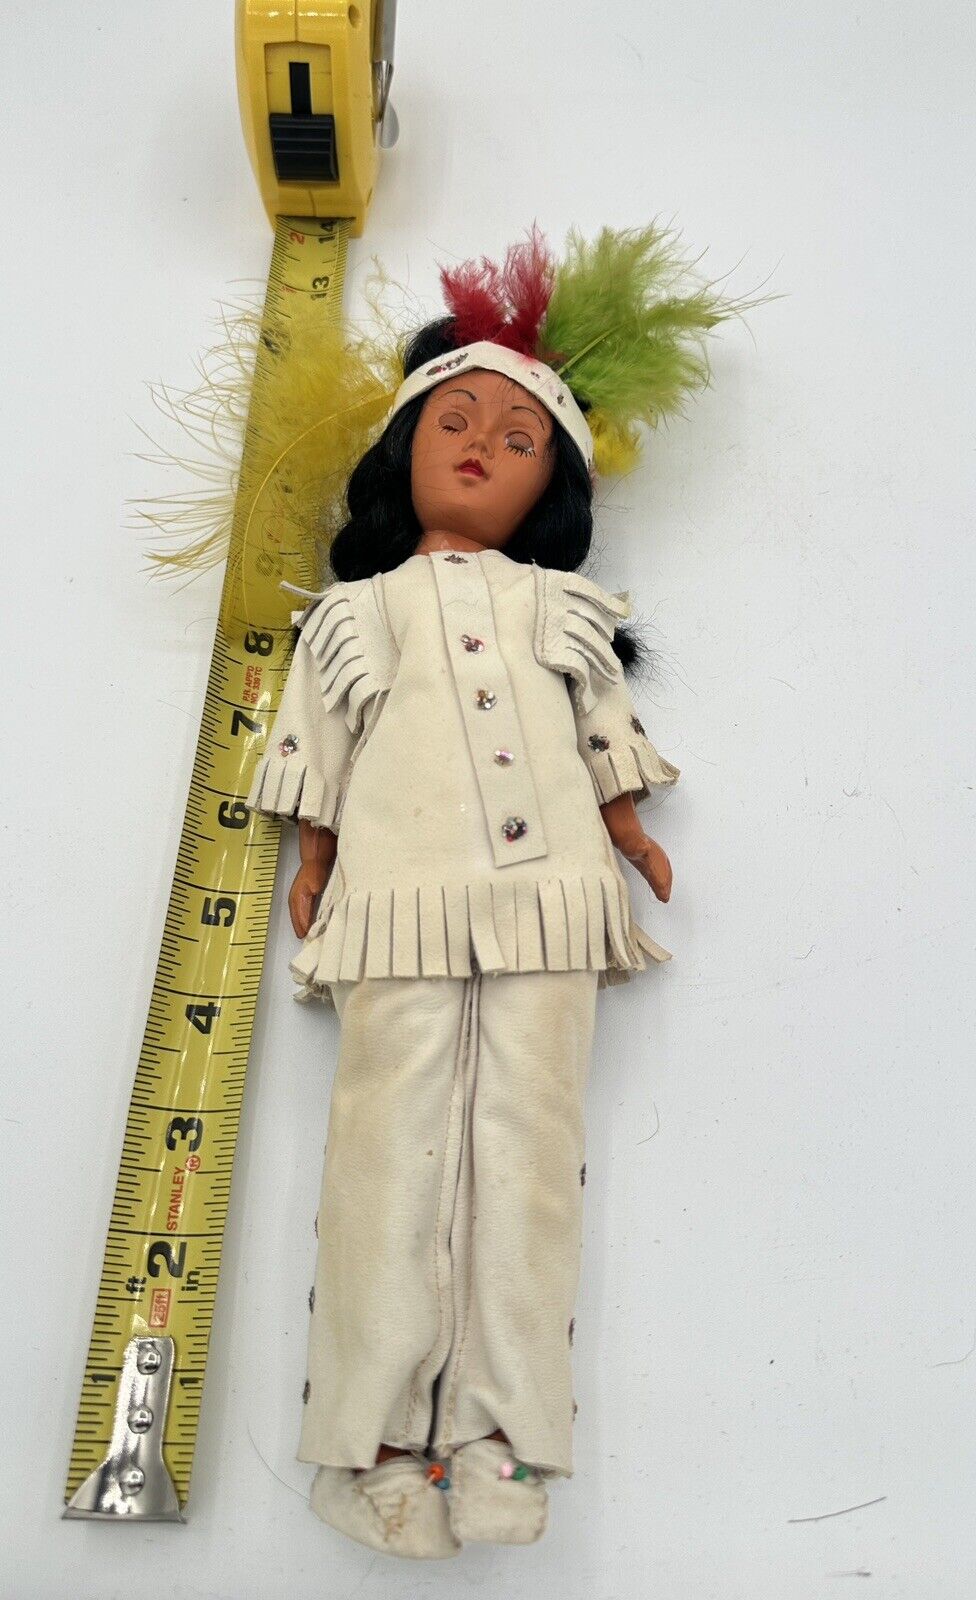 Vintage Native American Indian Girl Plastic Souvenir Doll Leather Cloth 12” Tall